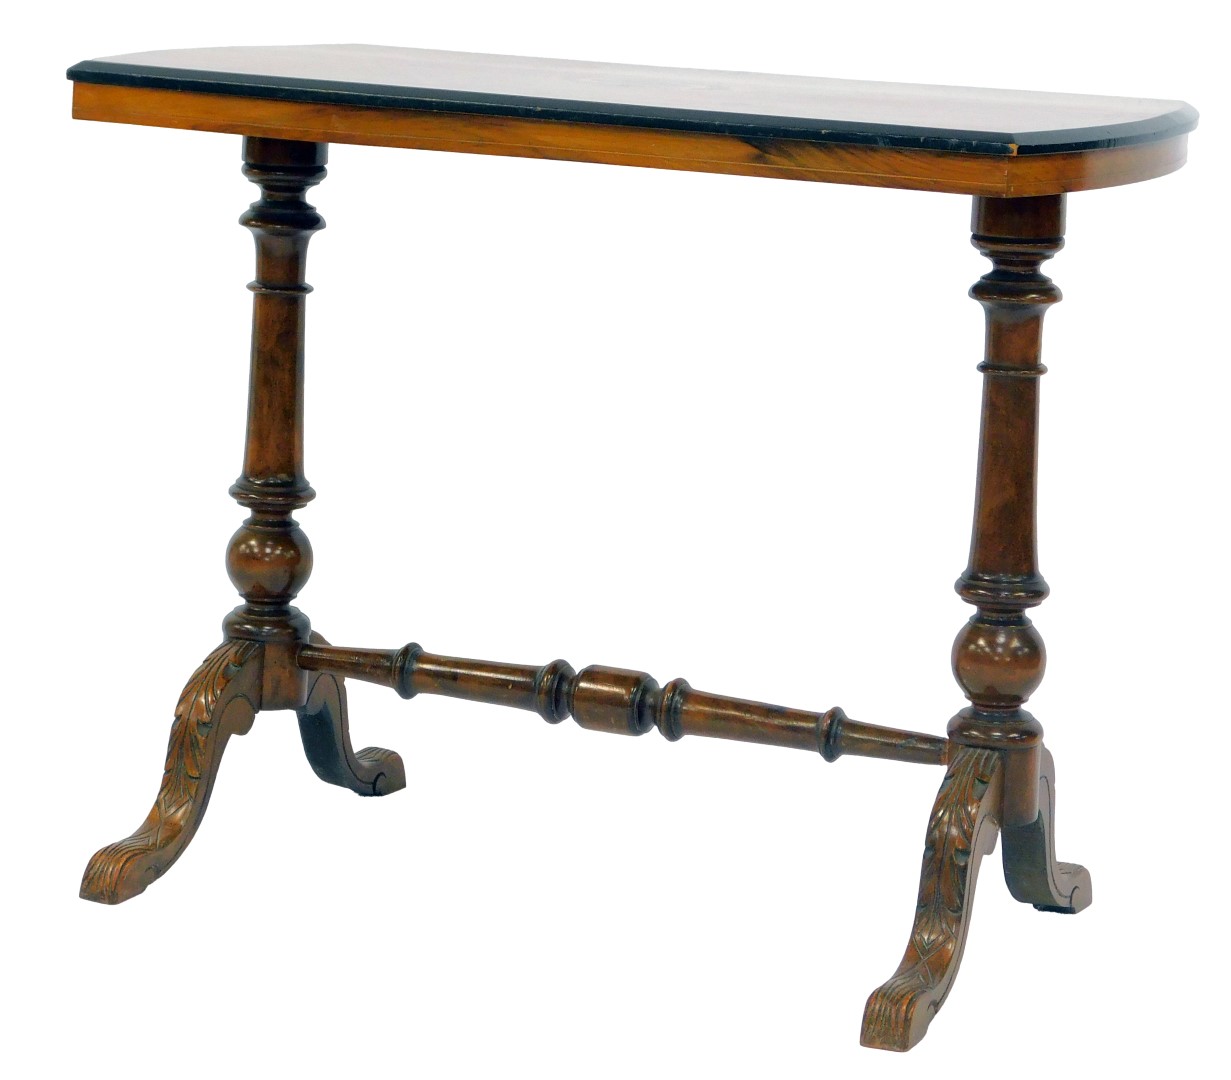 A Victorian walnut and marquetry inlaid occasional table, the shaped rectangular top inlaid with